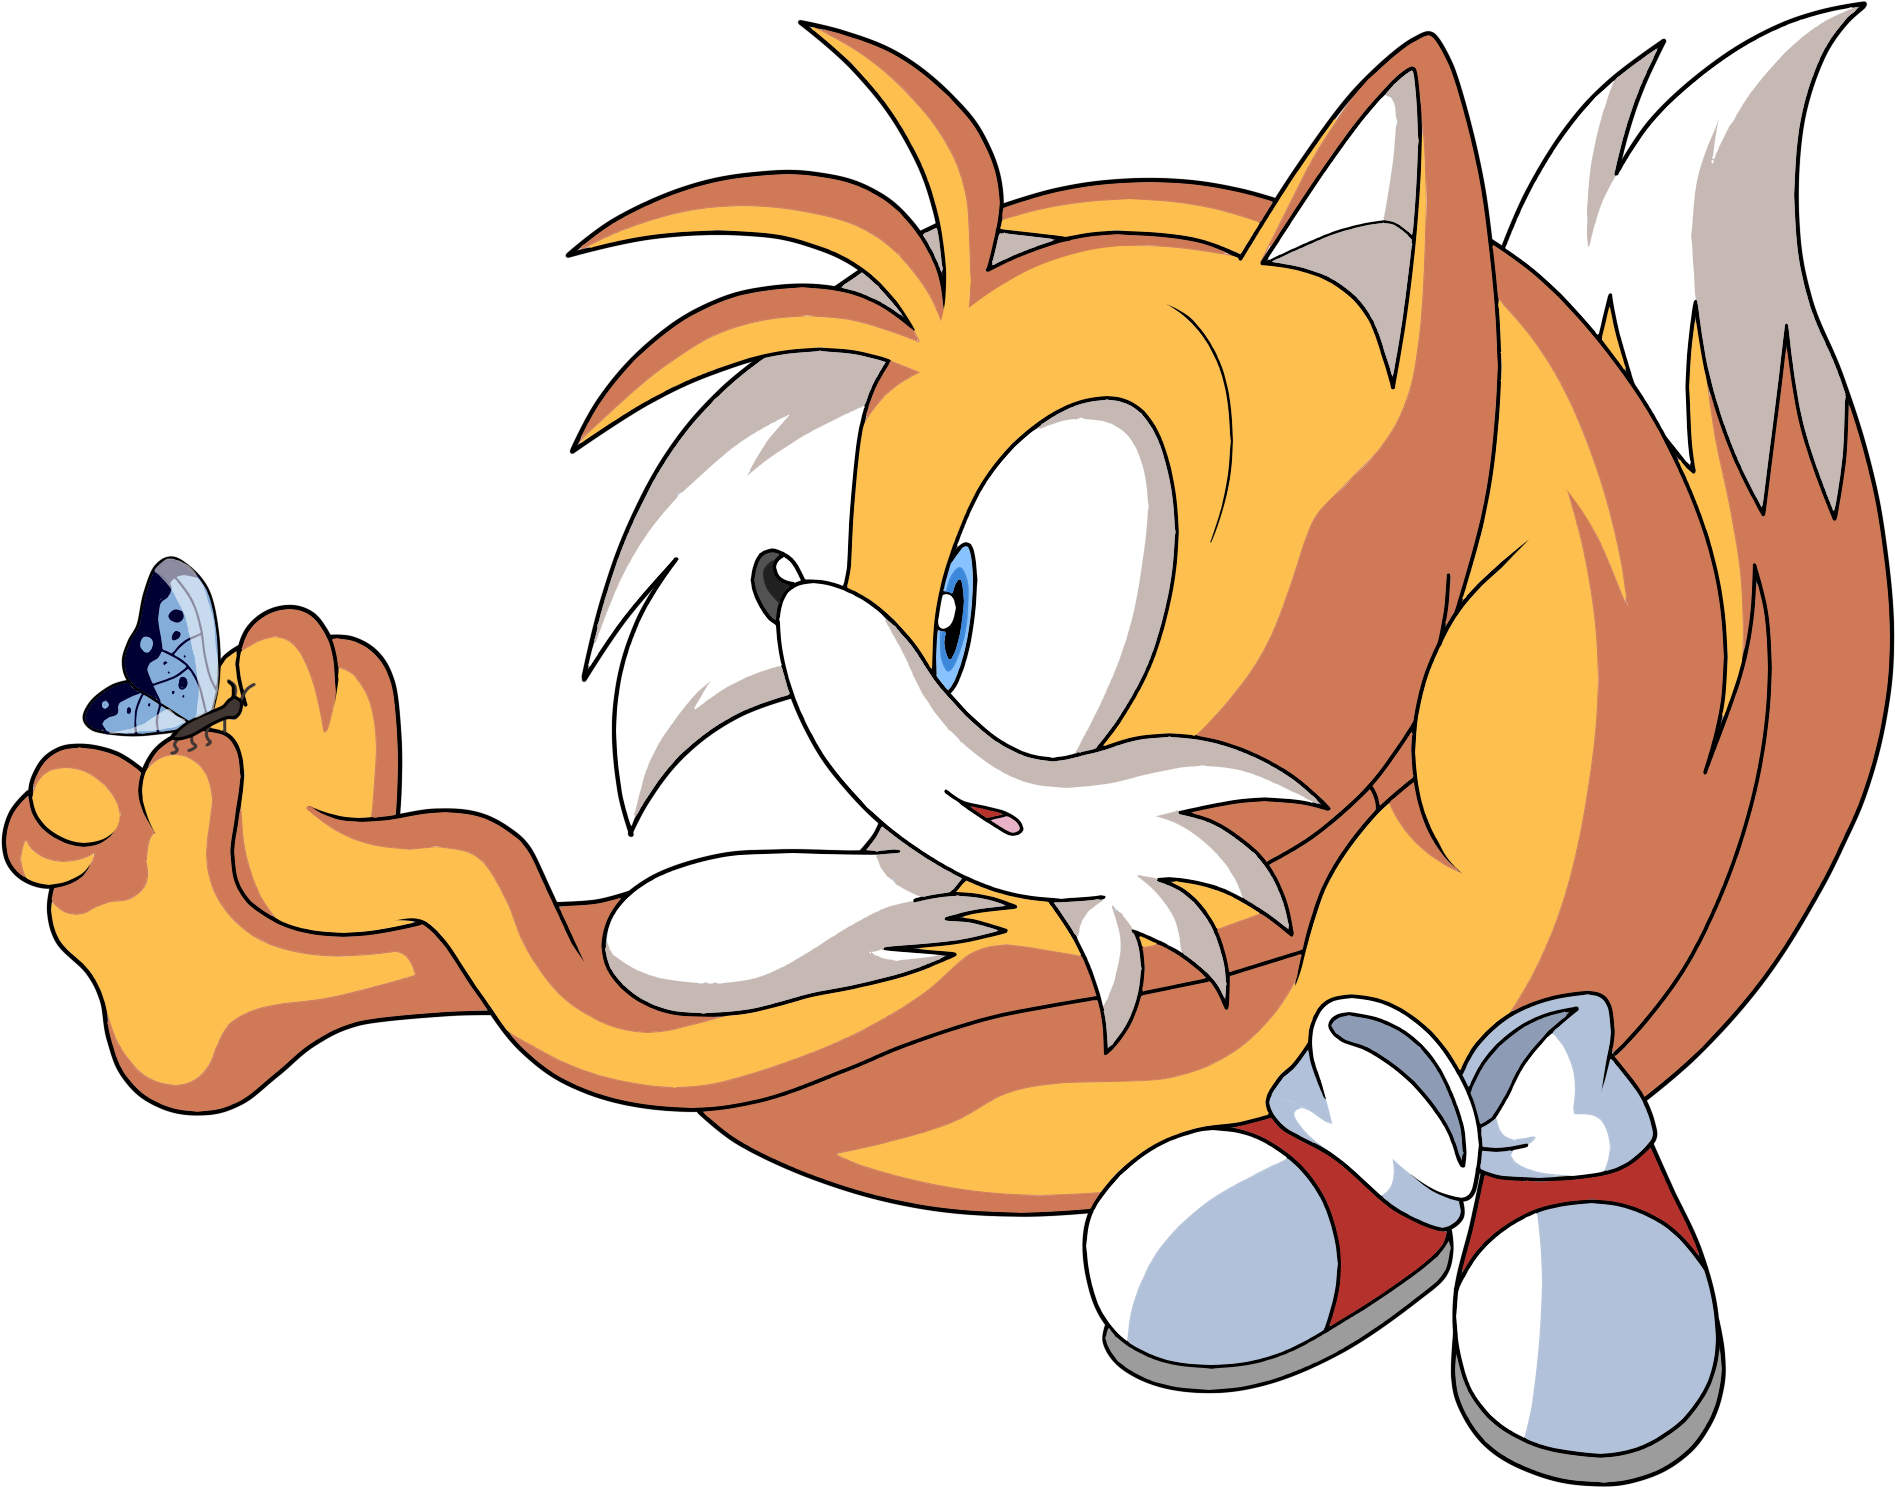 Tails animations. Tails Prower Shoes. Тейлз Прауэр. Лисёнок Тейлз. Miles Tails Prower.